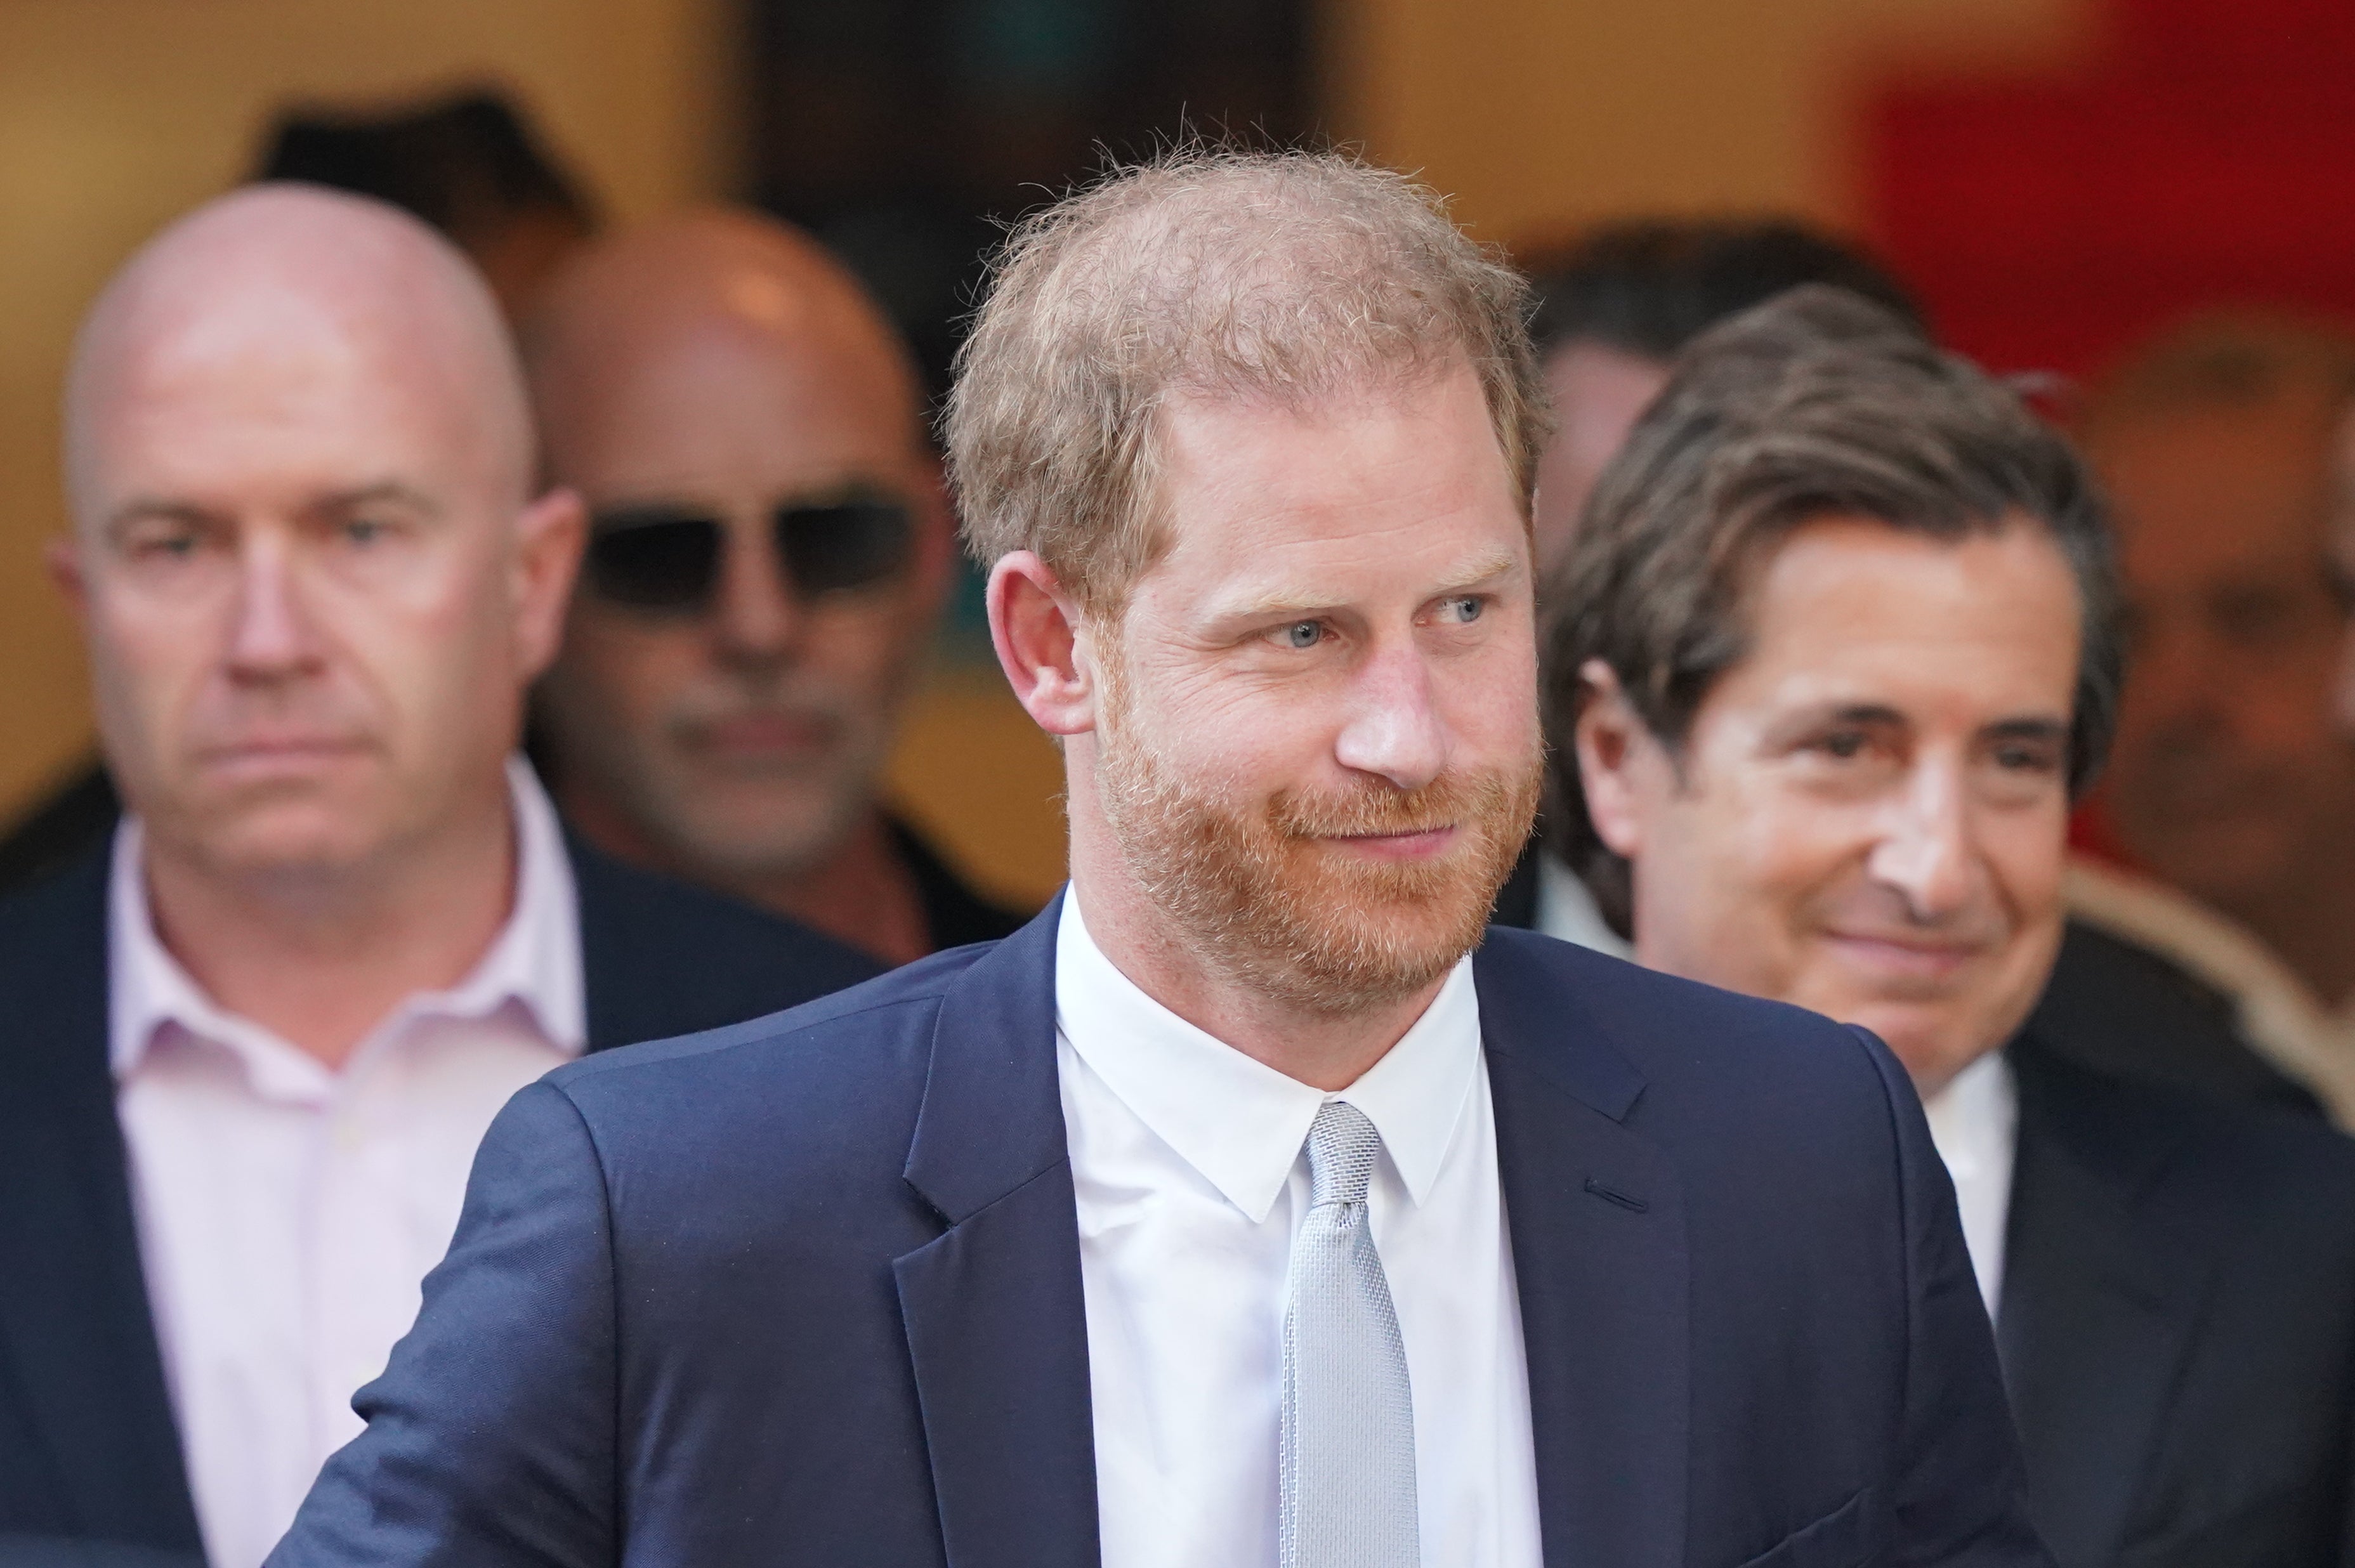 Prince Harry leaves the High Court in London after he finished giving evidence on Wednesday